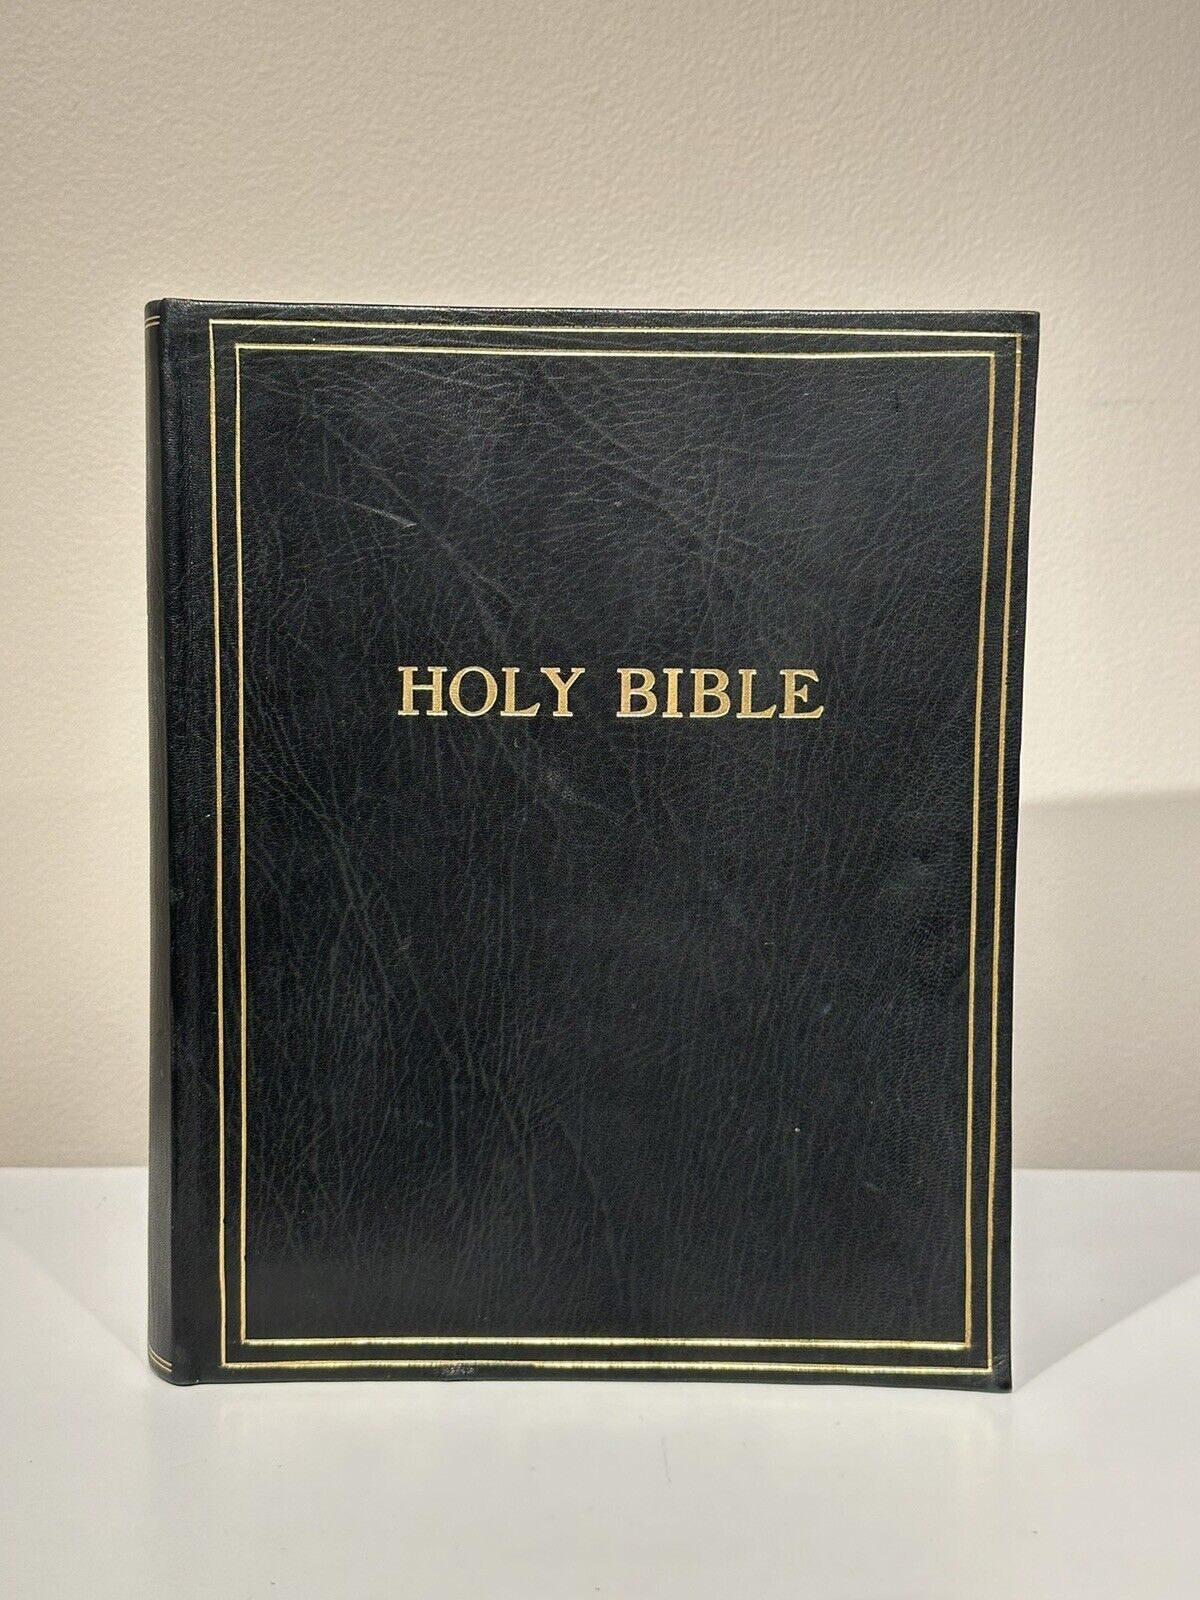 Rare Vintage Leather Bound 1936 Holy Bible With Gold-edge Pages, Blue Ribbon